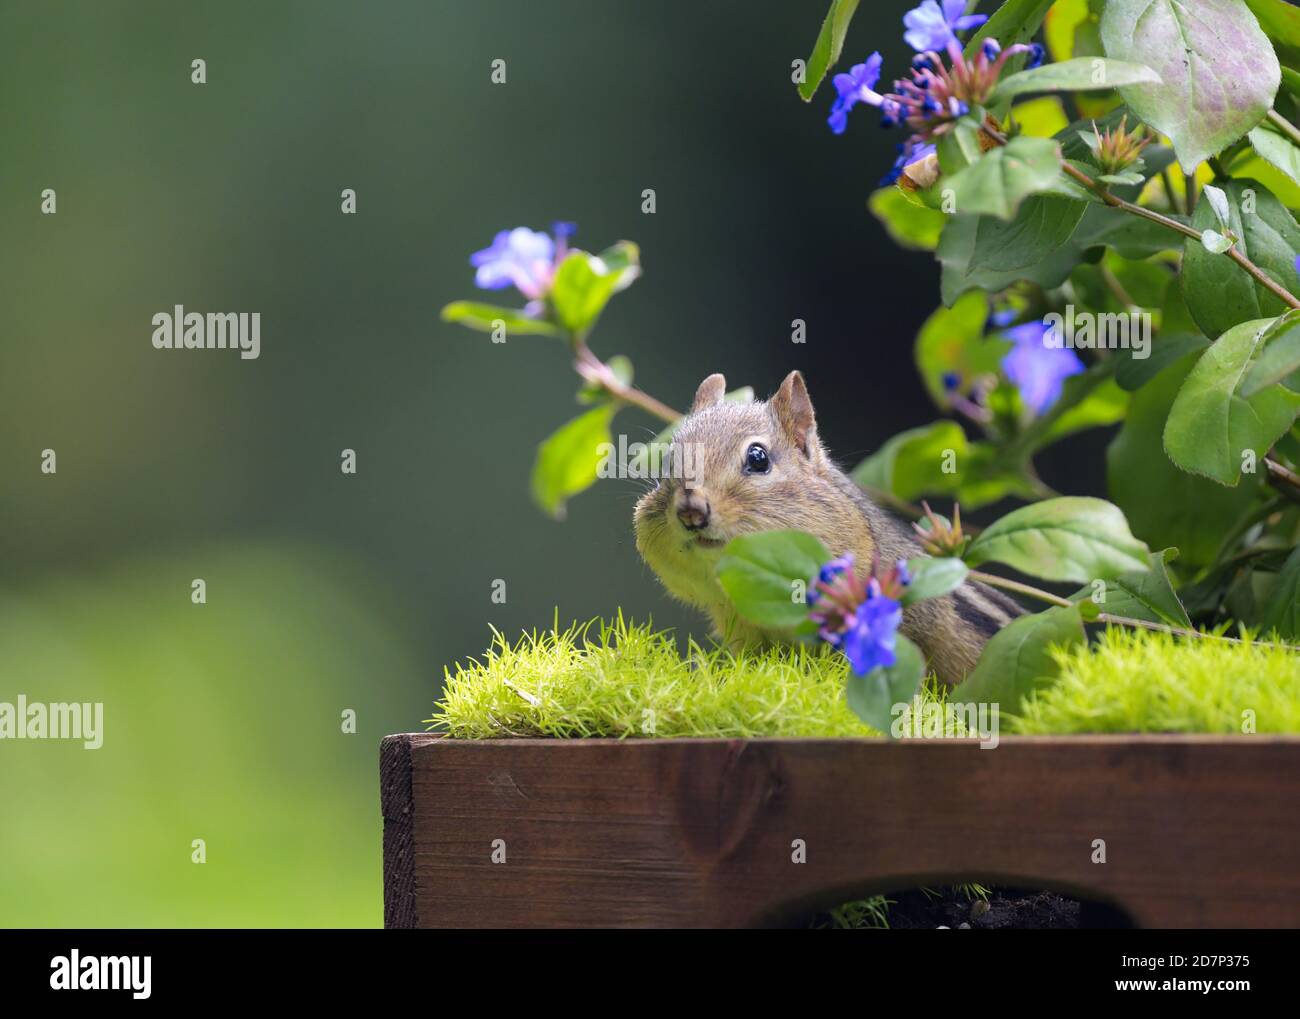 An Eastern chipmunk peeking out of some flowers Stock Photo